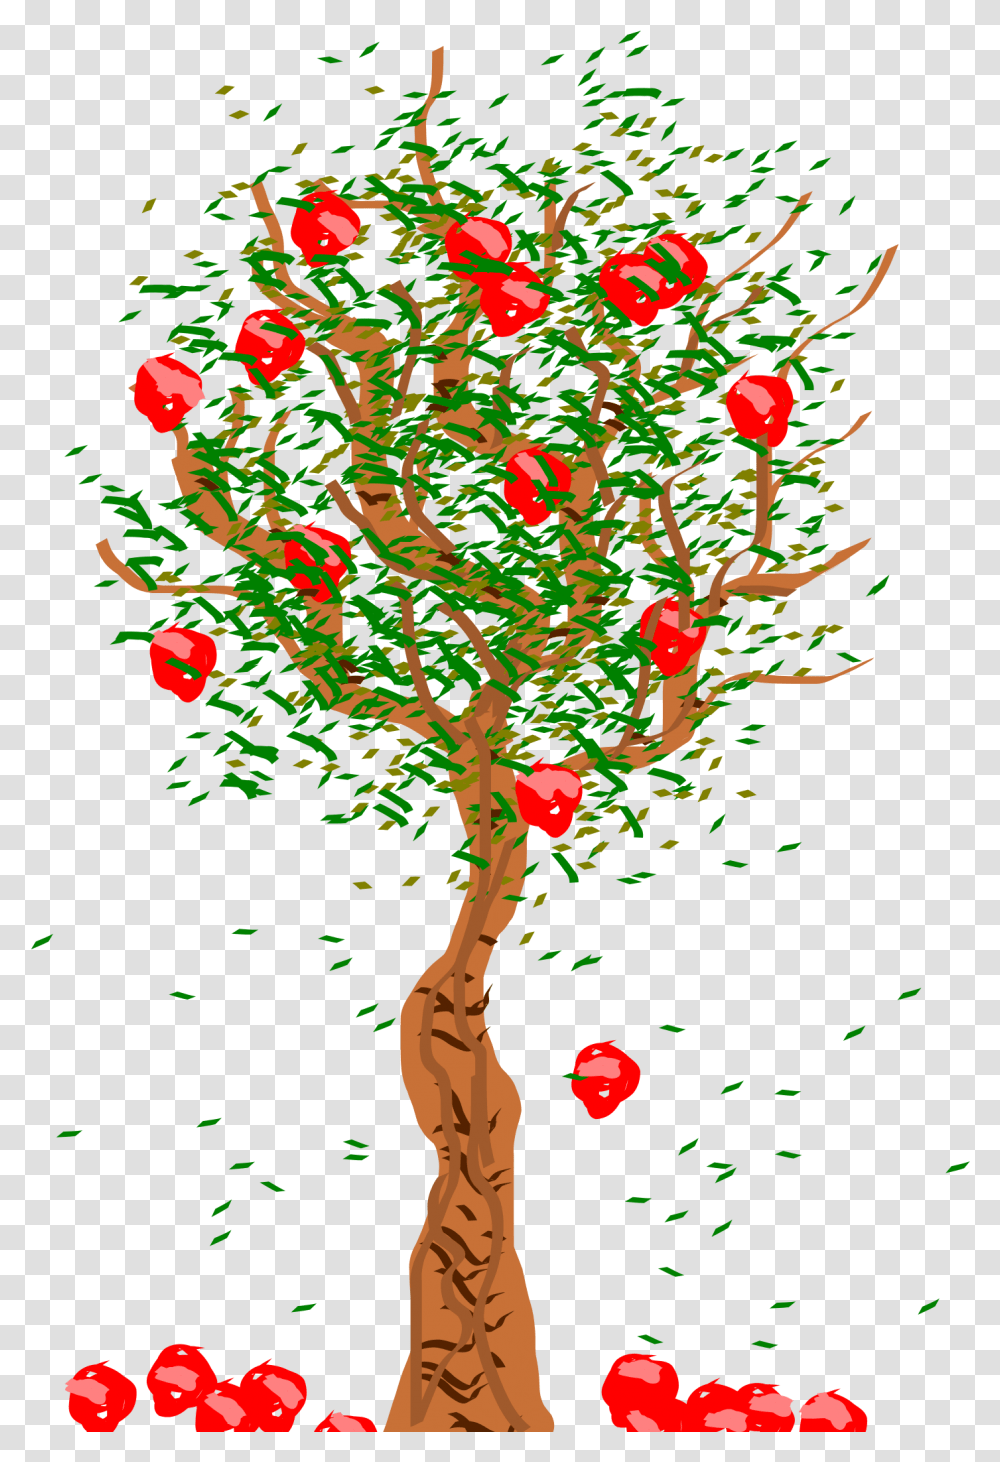 Library Of Free Jpg Apple Tree Files Clipart Art 2019 Apple Falling From Trees, Graphics, Light, Pattern, Poster Transparent Png